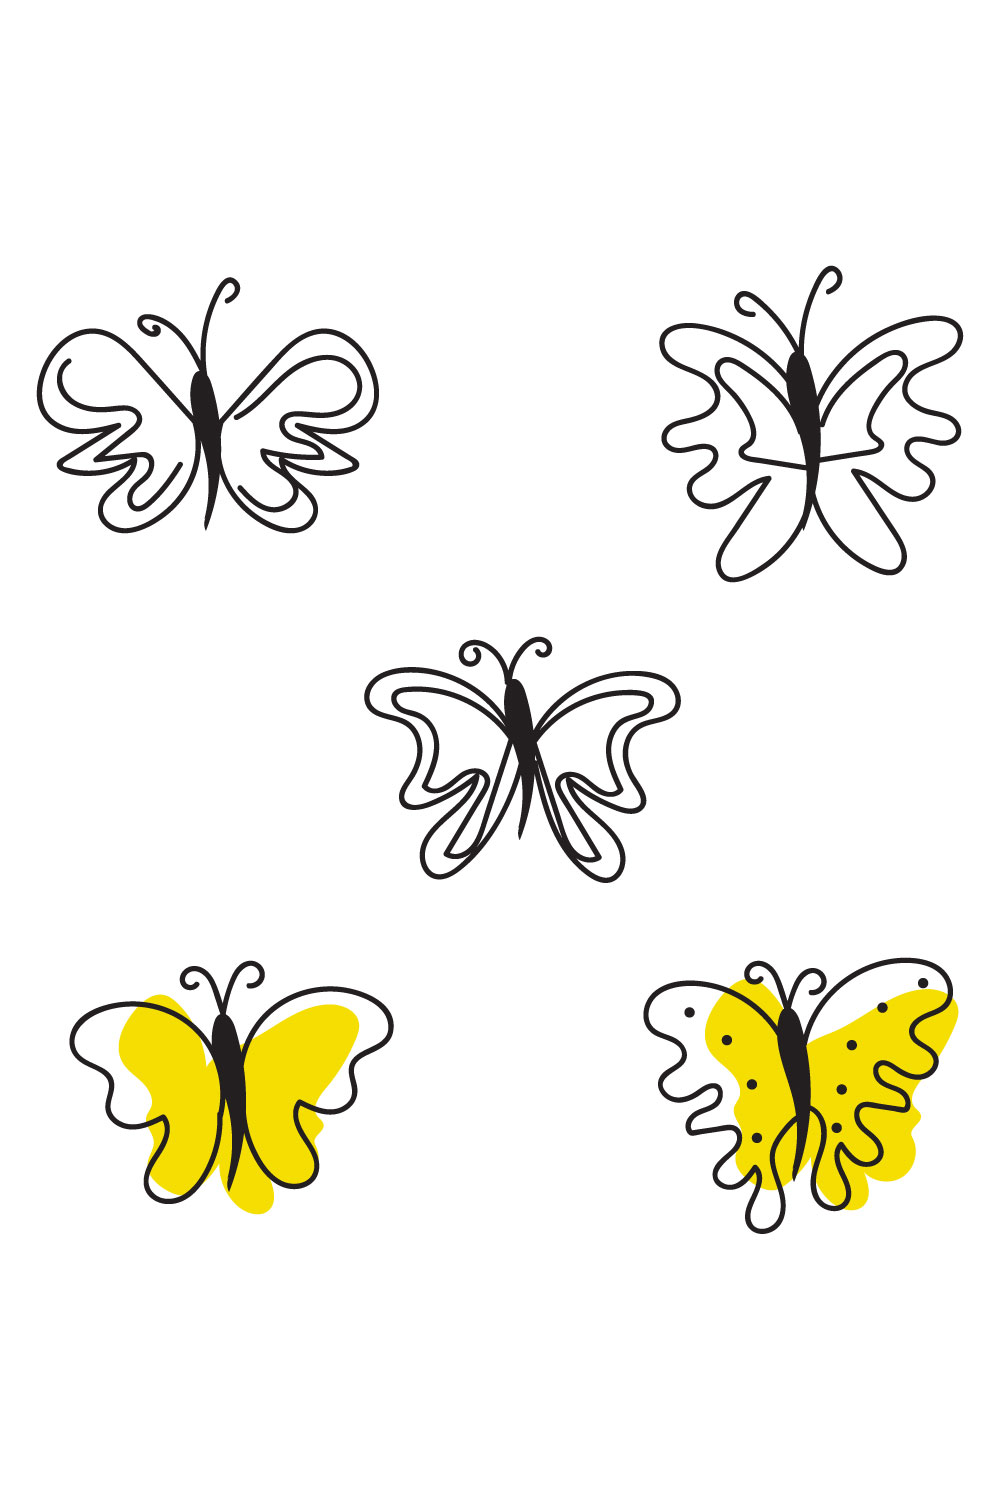 Group of four different colored butterflies.